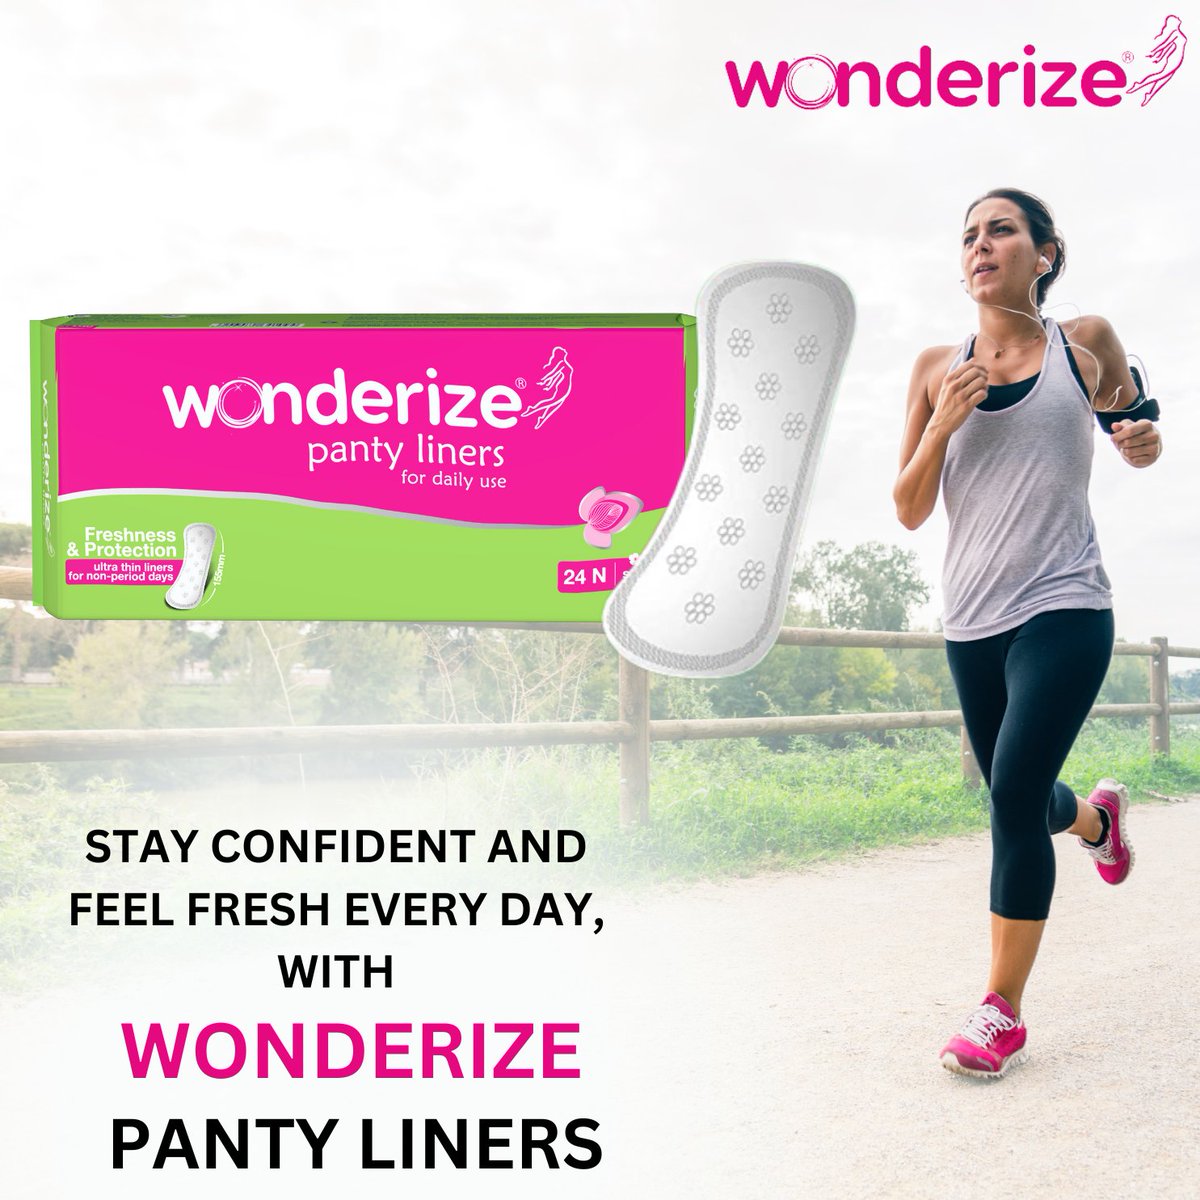 STAY CONFIDENT AND FEEL FRESH EVERY DAY, WITH WONDERIZE PANTY LINERS
#Wonderize #wonderizepantyliner #SanitaryNapkin #PeriodProtection #Periods #Pads #Period #periodproblems #periodpositive #periodleaks  #LetsTalkPeriods #staysafewithwonderize #pantyliners #pantyliner #panty